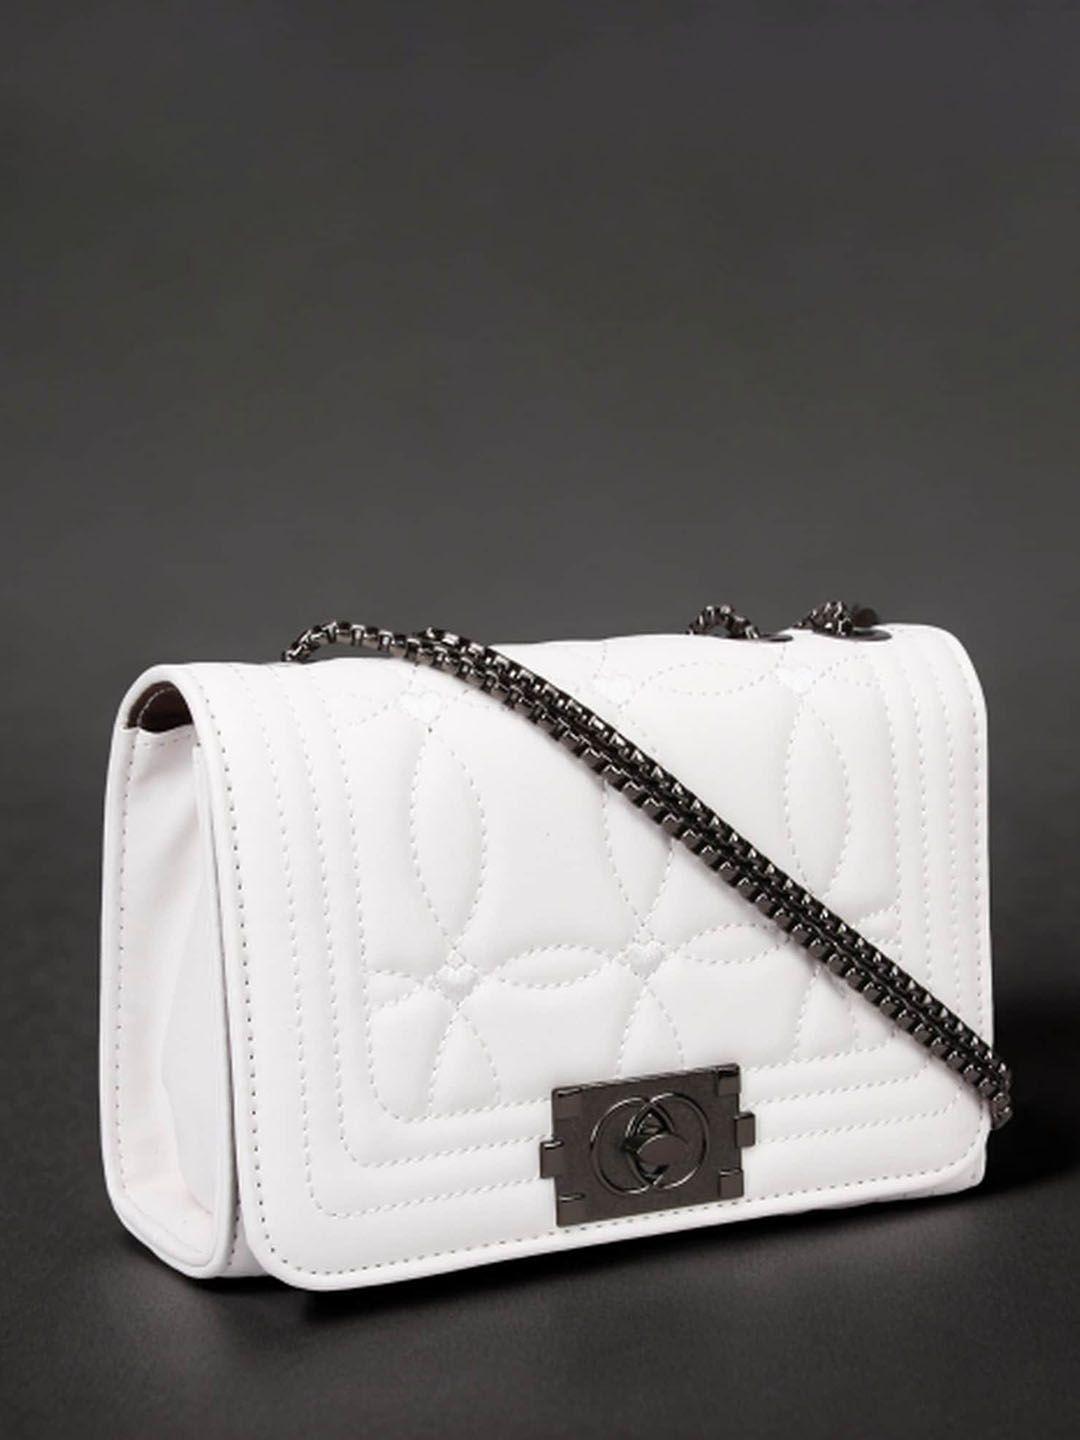 diva dale textured structured sling bag with quilted details